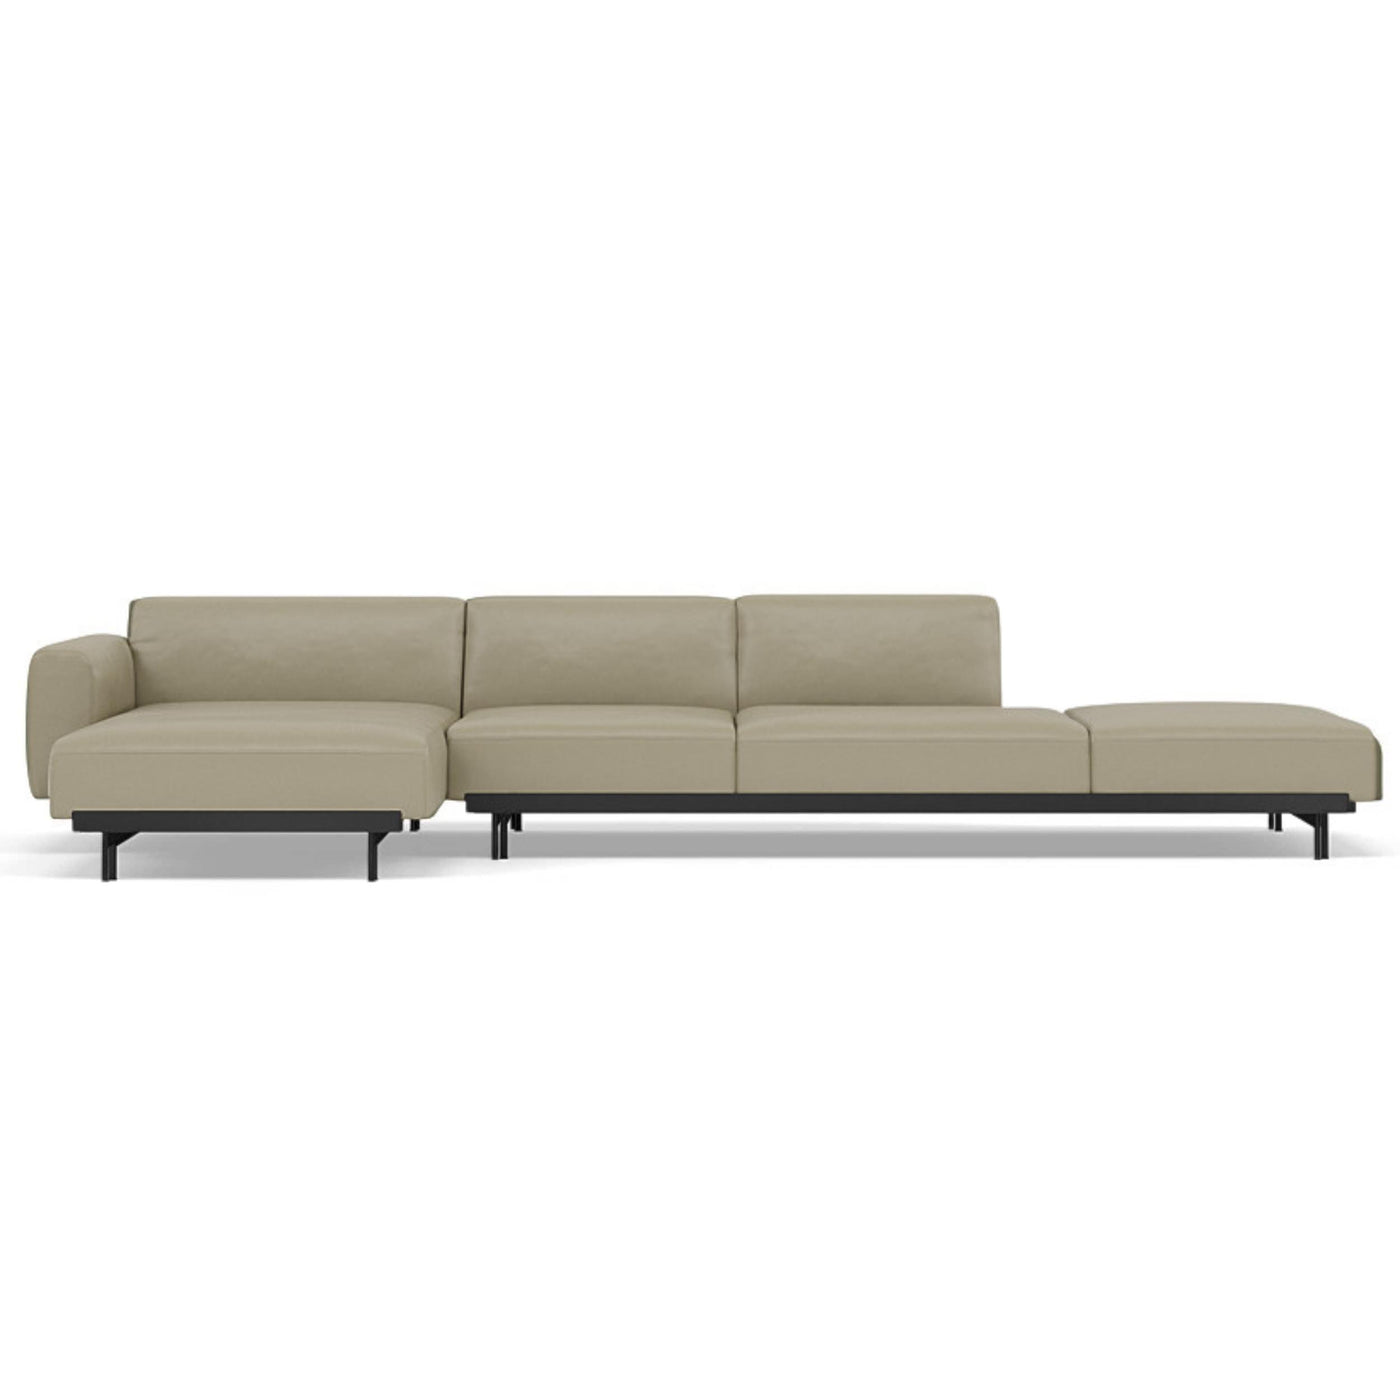 Muuto In Situ Modular 4 Seater Sofa configuration 5. Made to order from someday designs. #colour_stone-refine-leather